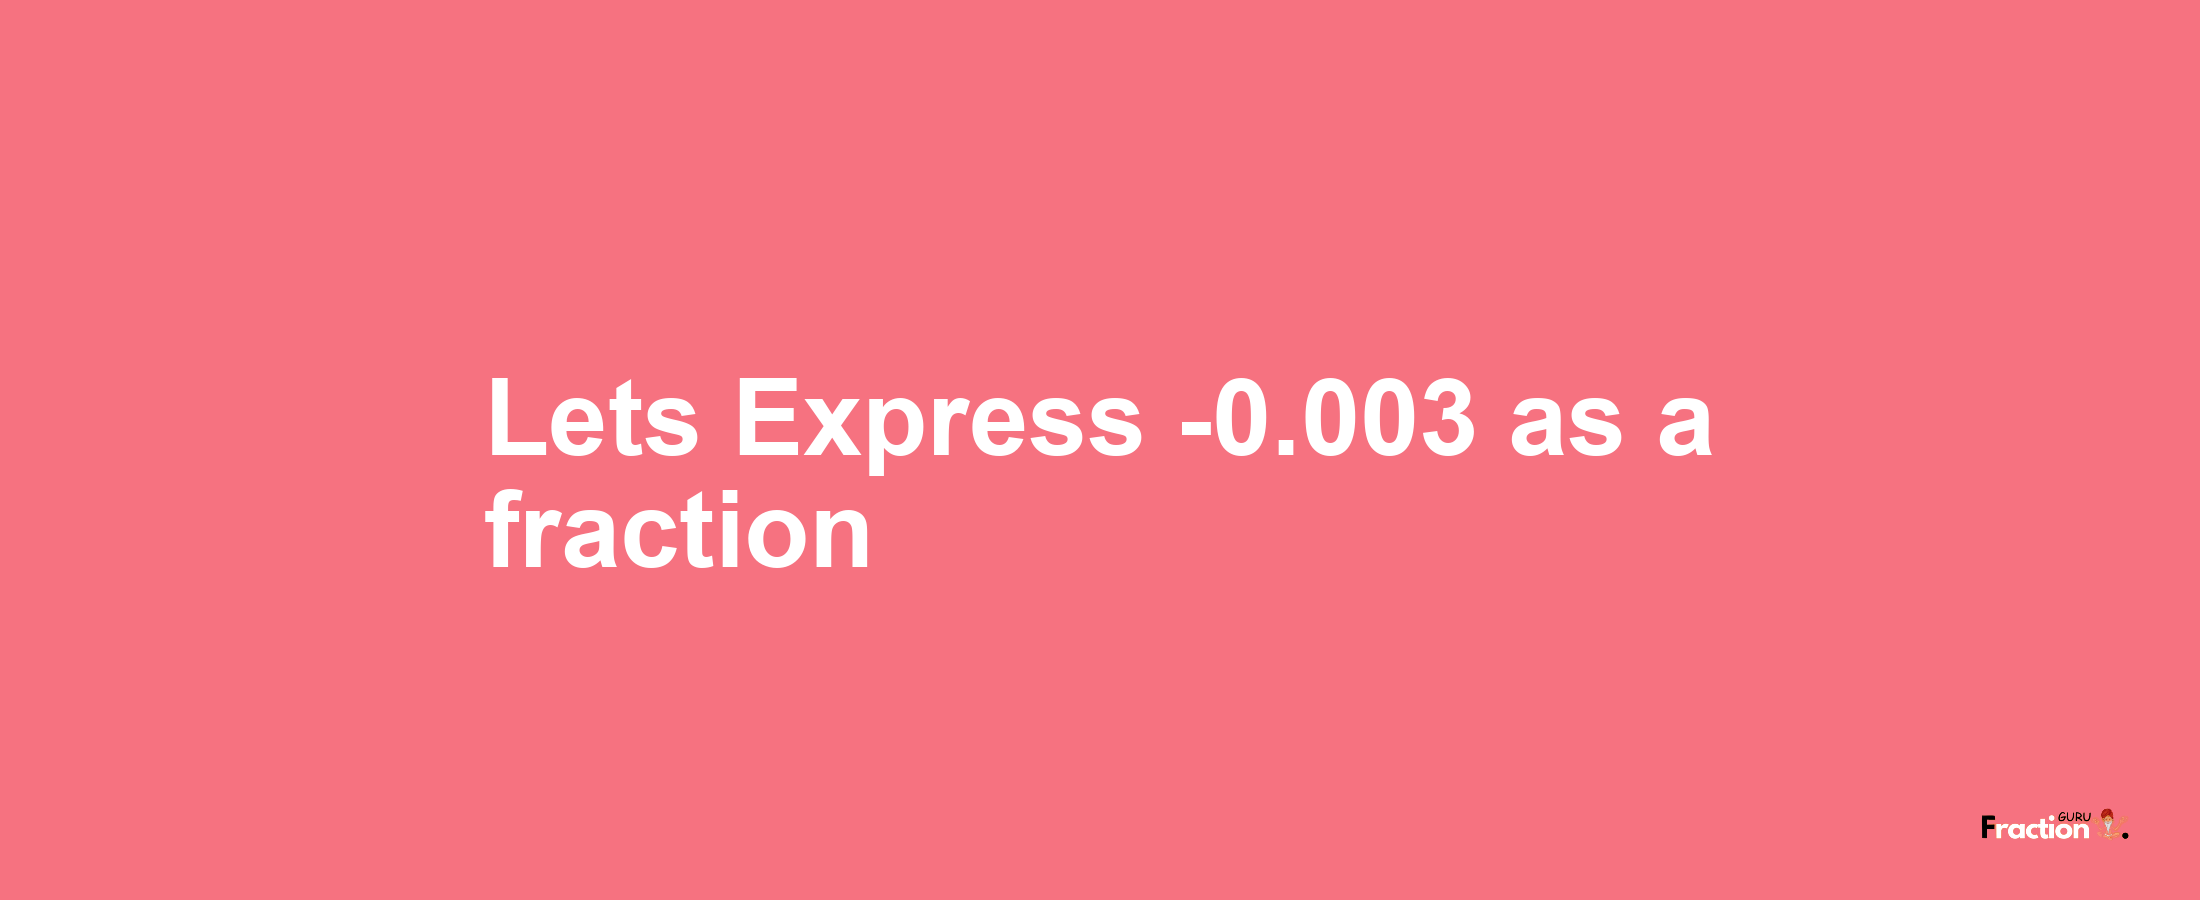 Lets Express -0.003 as afraction